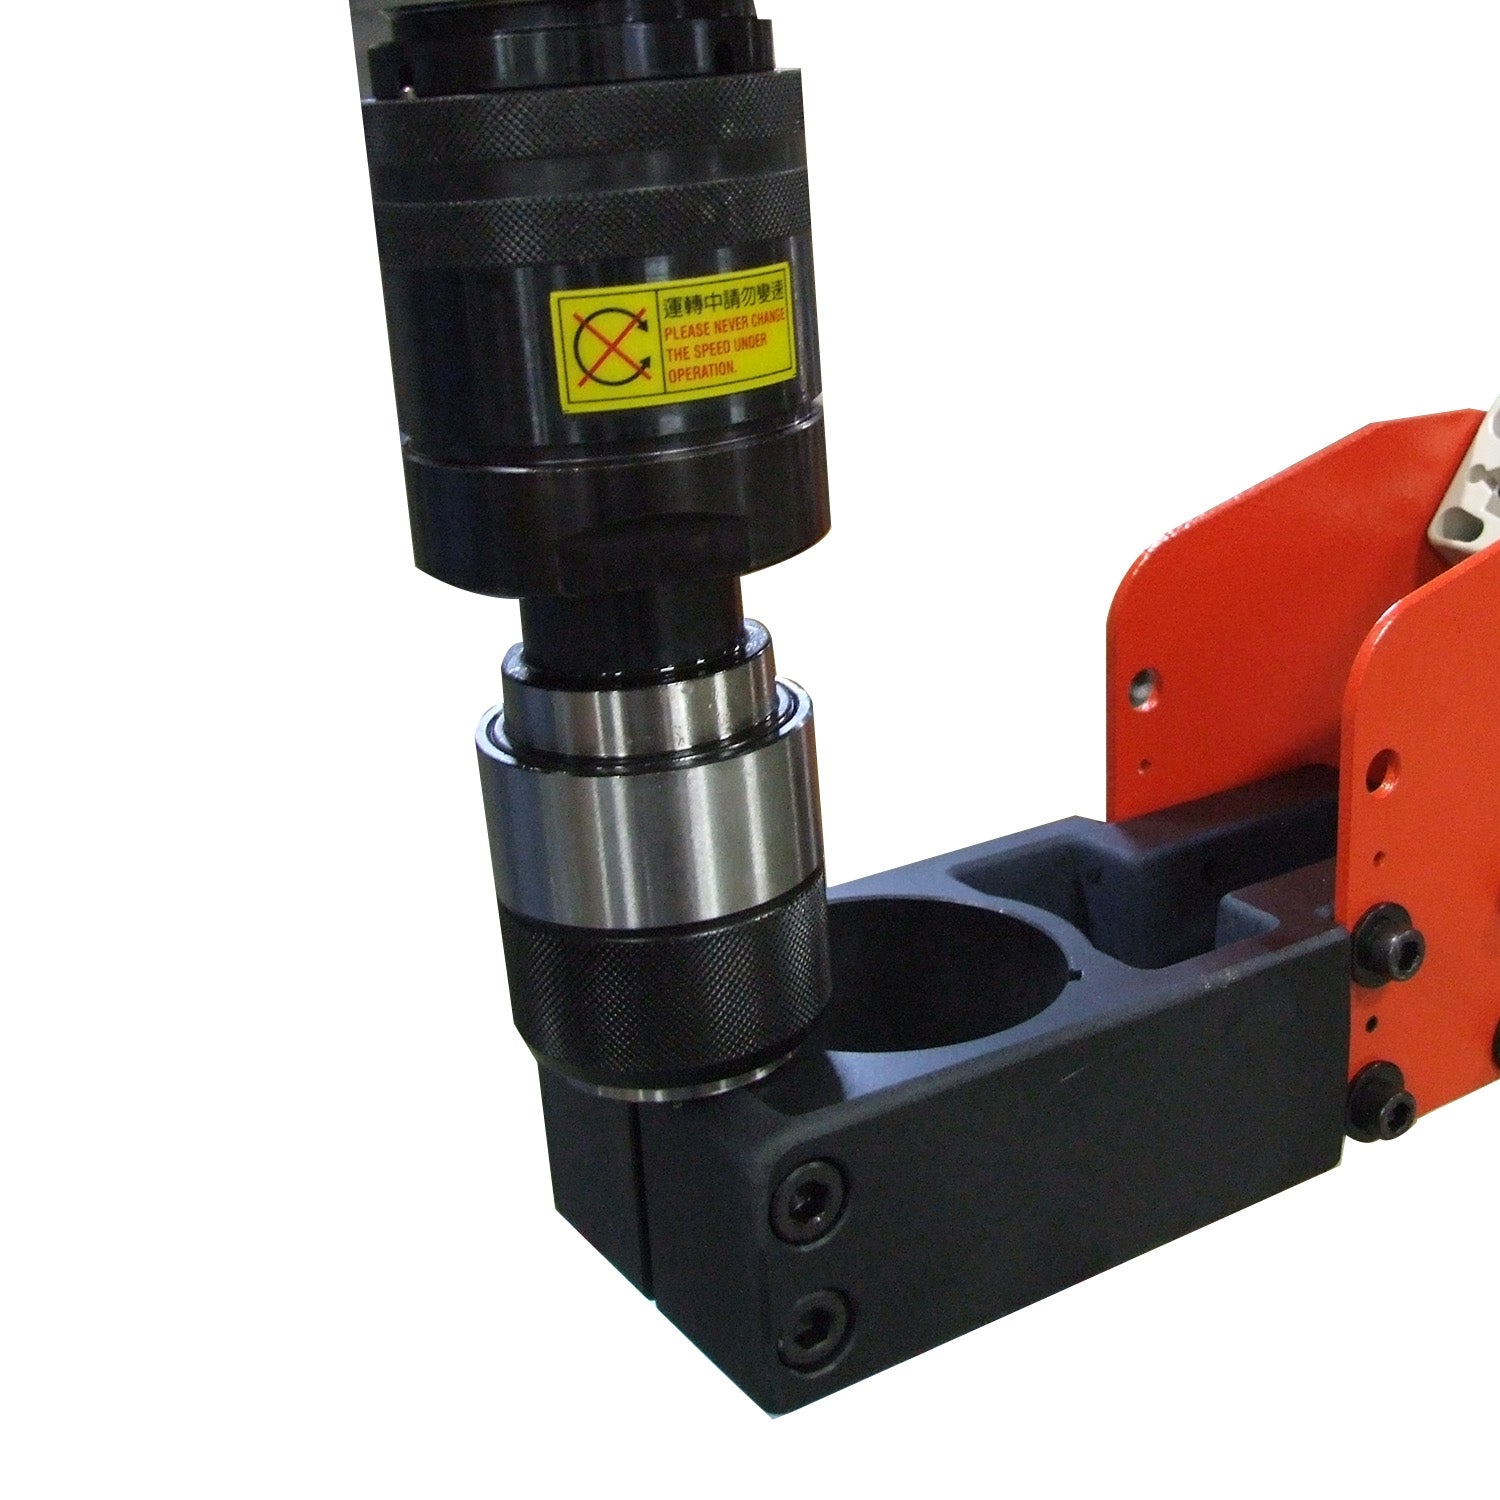 Baileigh ATM-27-1000 Single Arm Air Powered Tapping Machine, 1/8"-1" Tapping Capacity:39" Max Range *Does not fit cart*